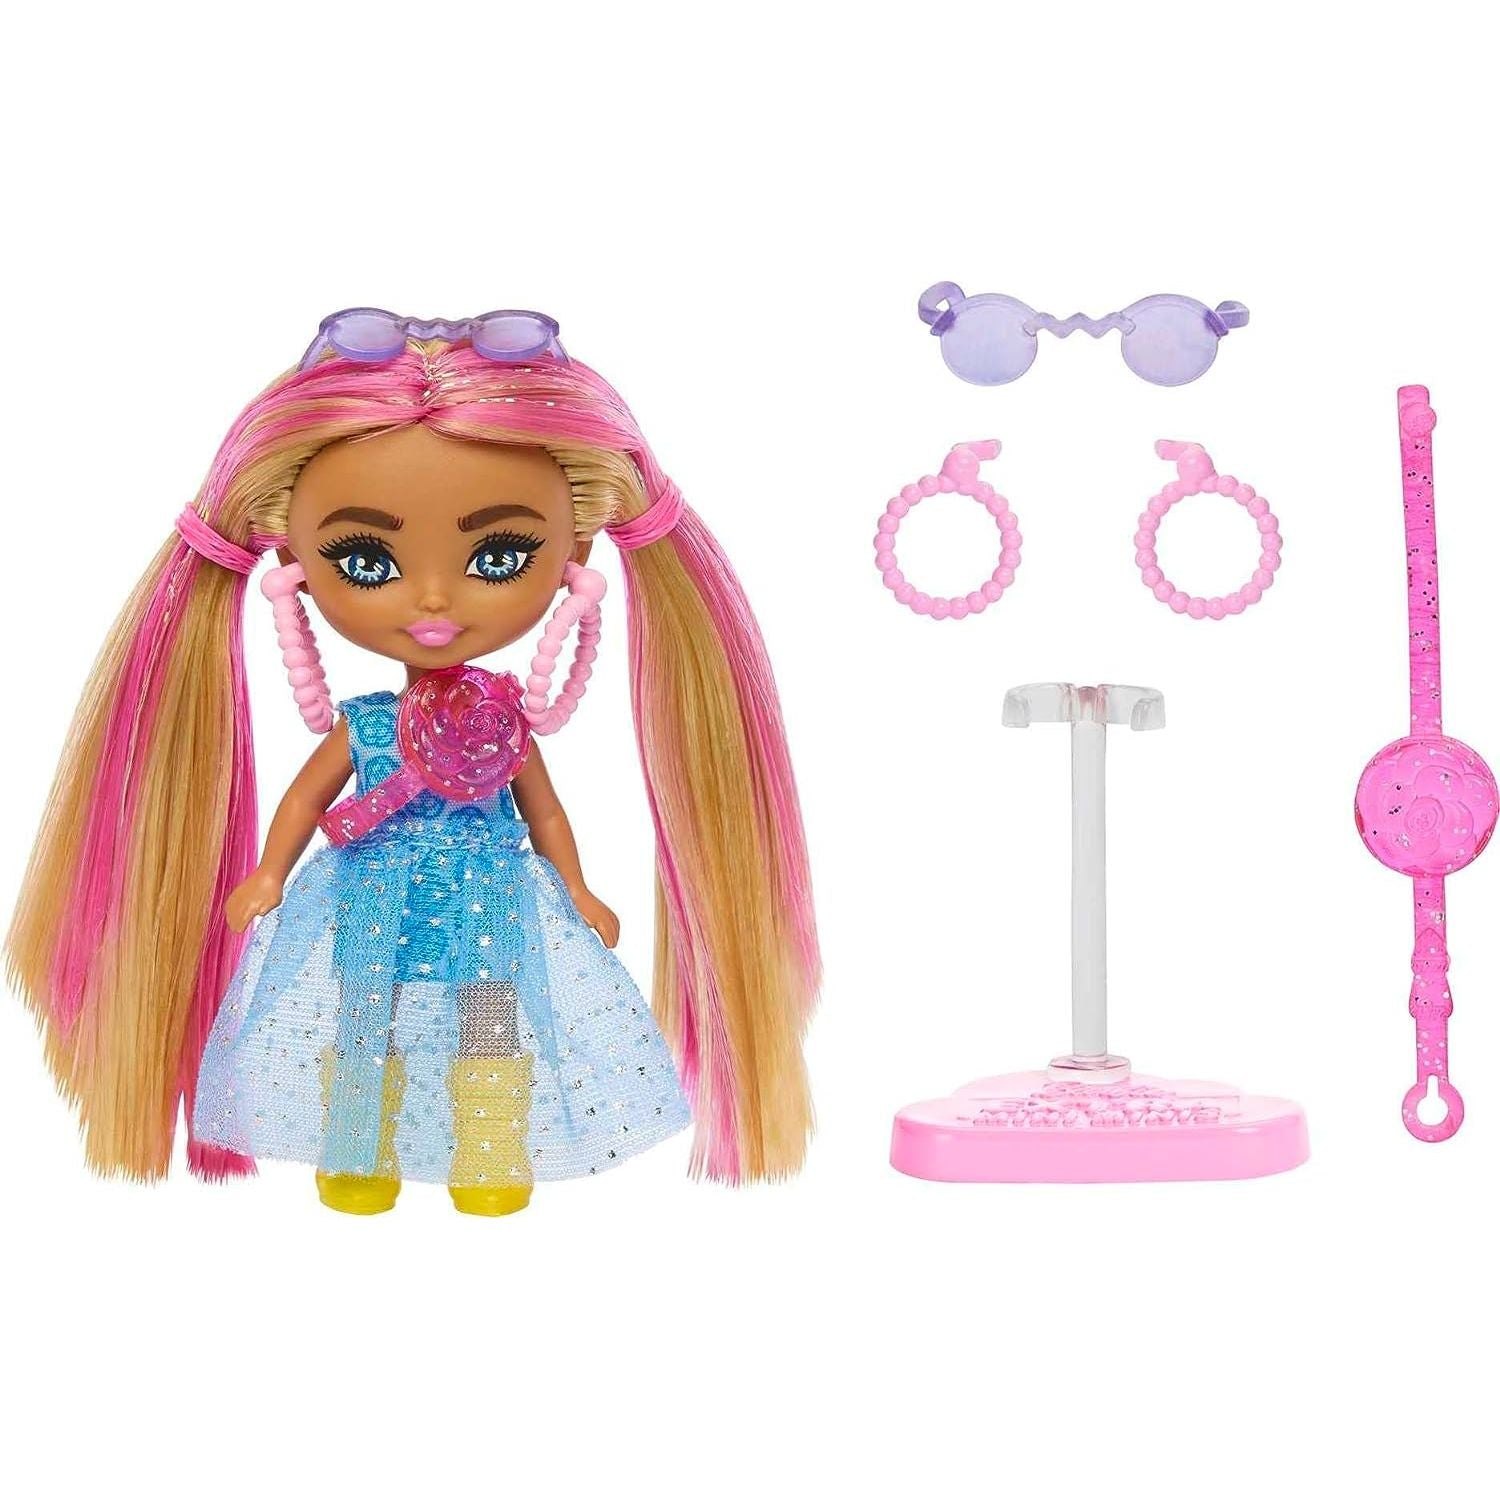 Barbie Extra Mini Minis Doll with Pink-Streaked Blonde Pigtails Wearing Blue Dress & Accessories & Stand, 3.25-inch